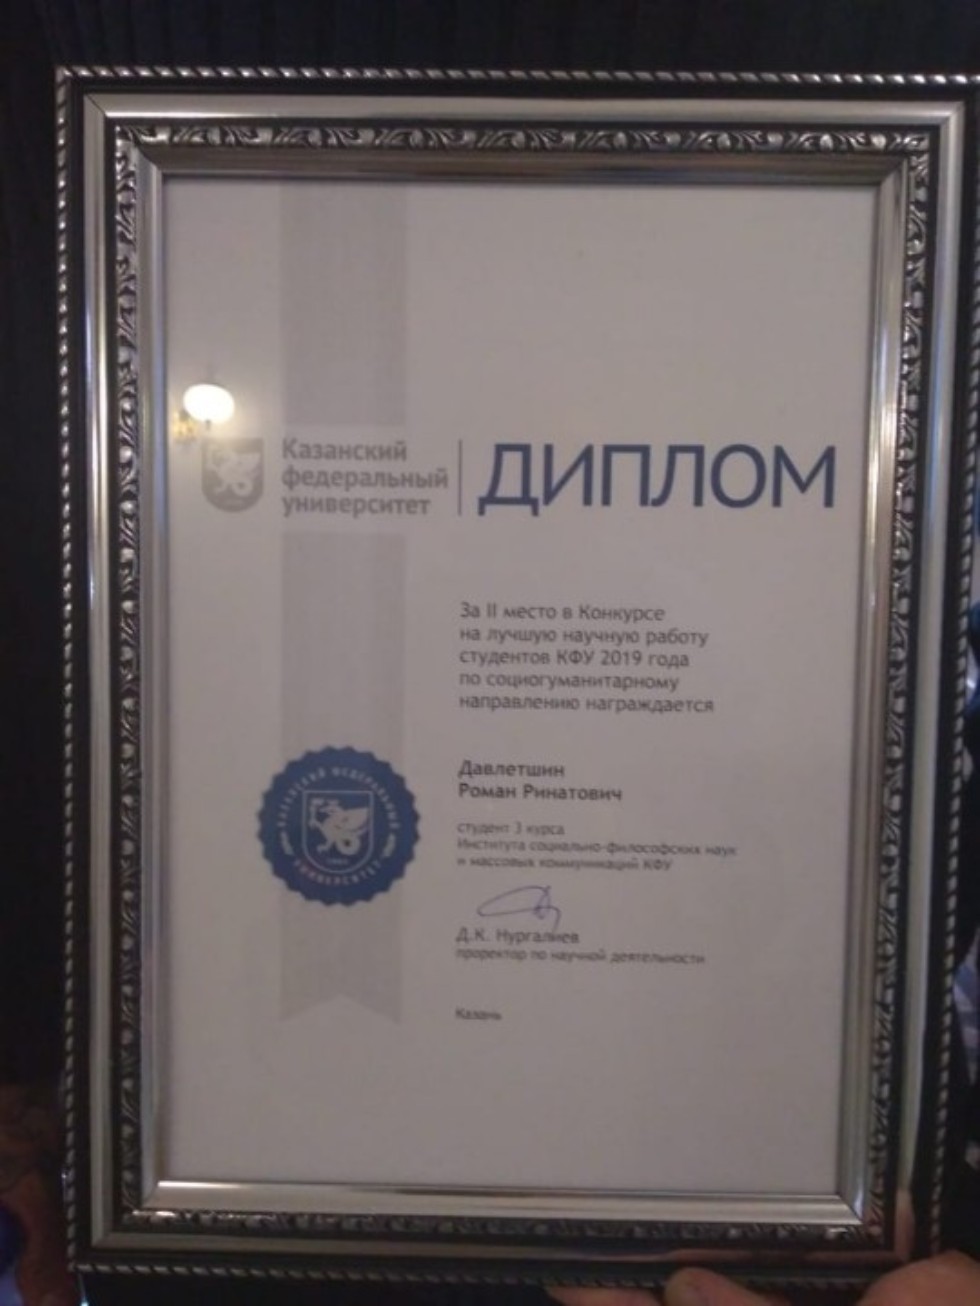 Department of Religious Studies student took the II place in the competition for the best scientific work of Kazan Federal University ,Department of Religious Studies